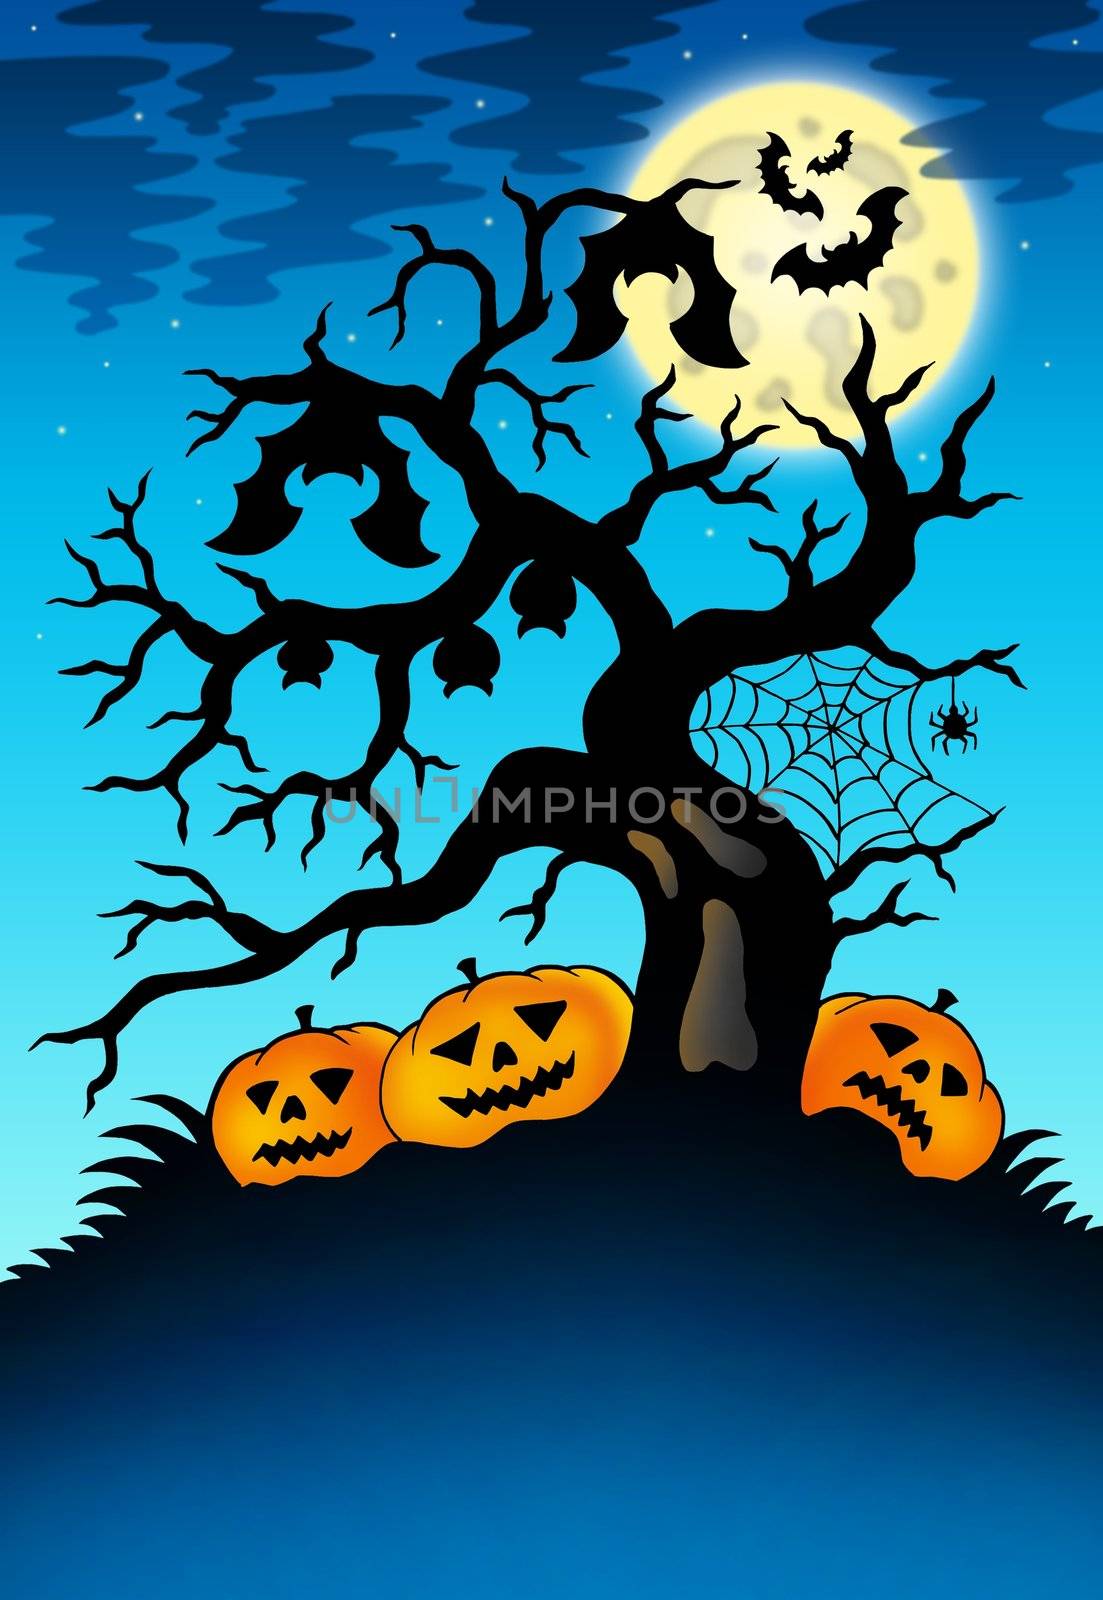 Spooky tree with bats and pumpkins by clairev